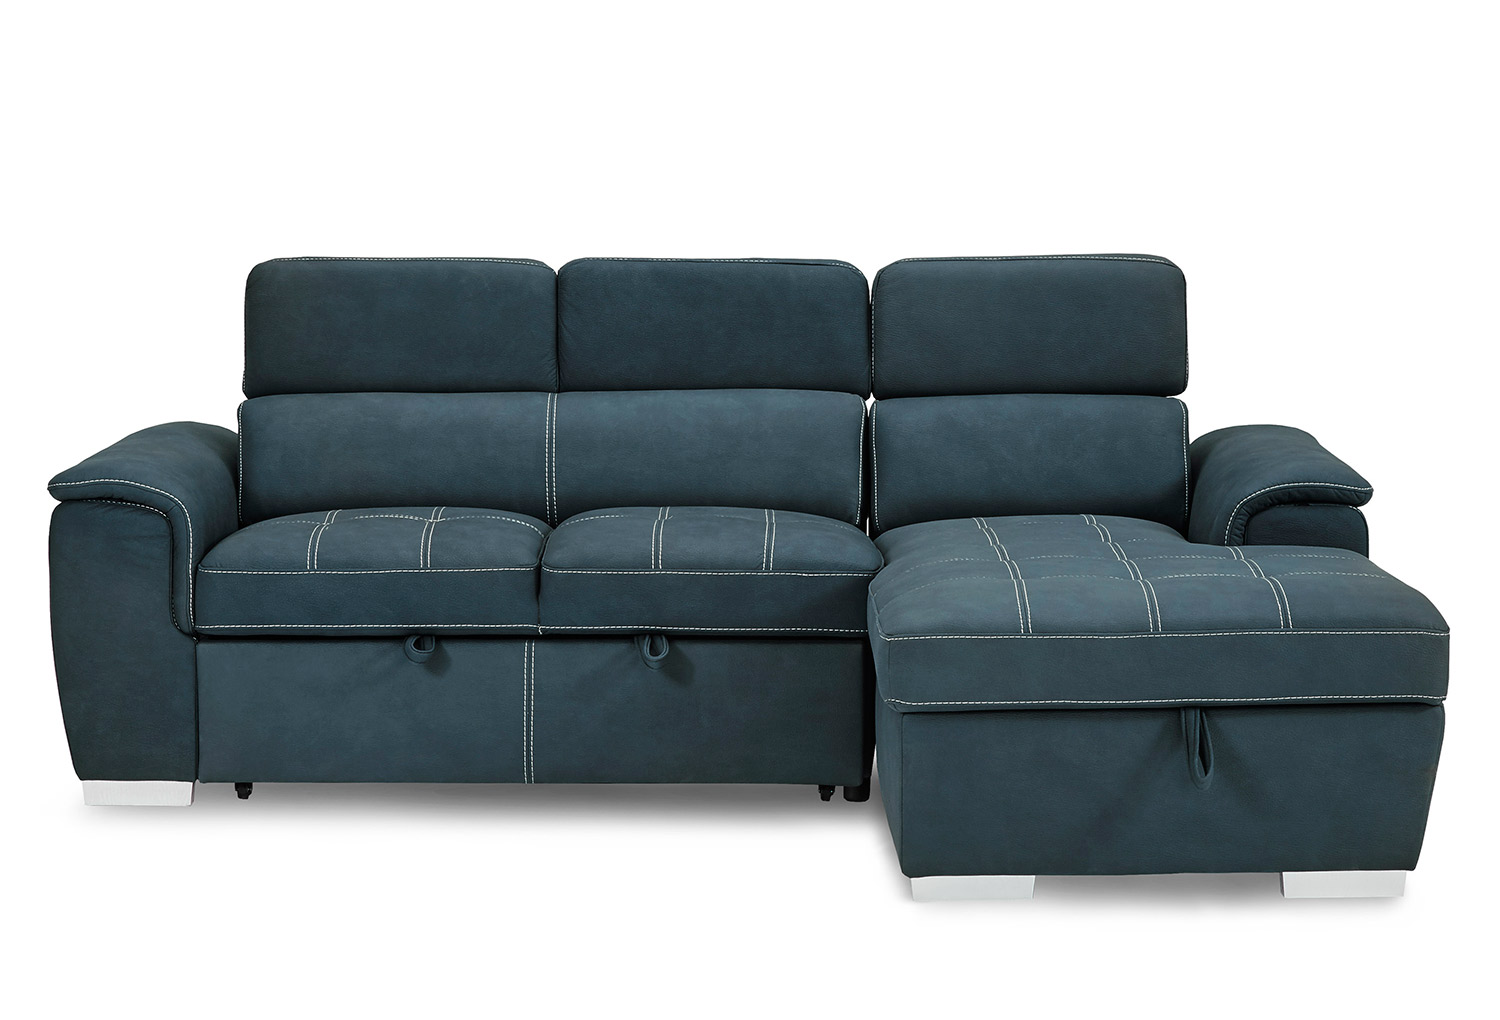 Homelegance Ferriday Sectional with Pull-out Bed and Hidden Storage - Blue